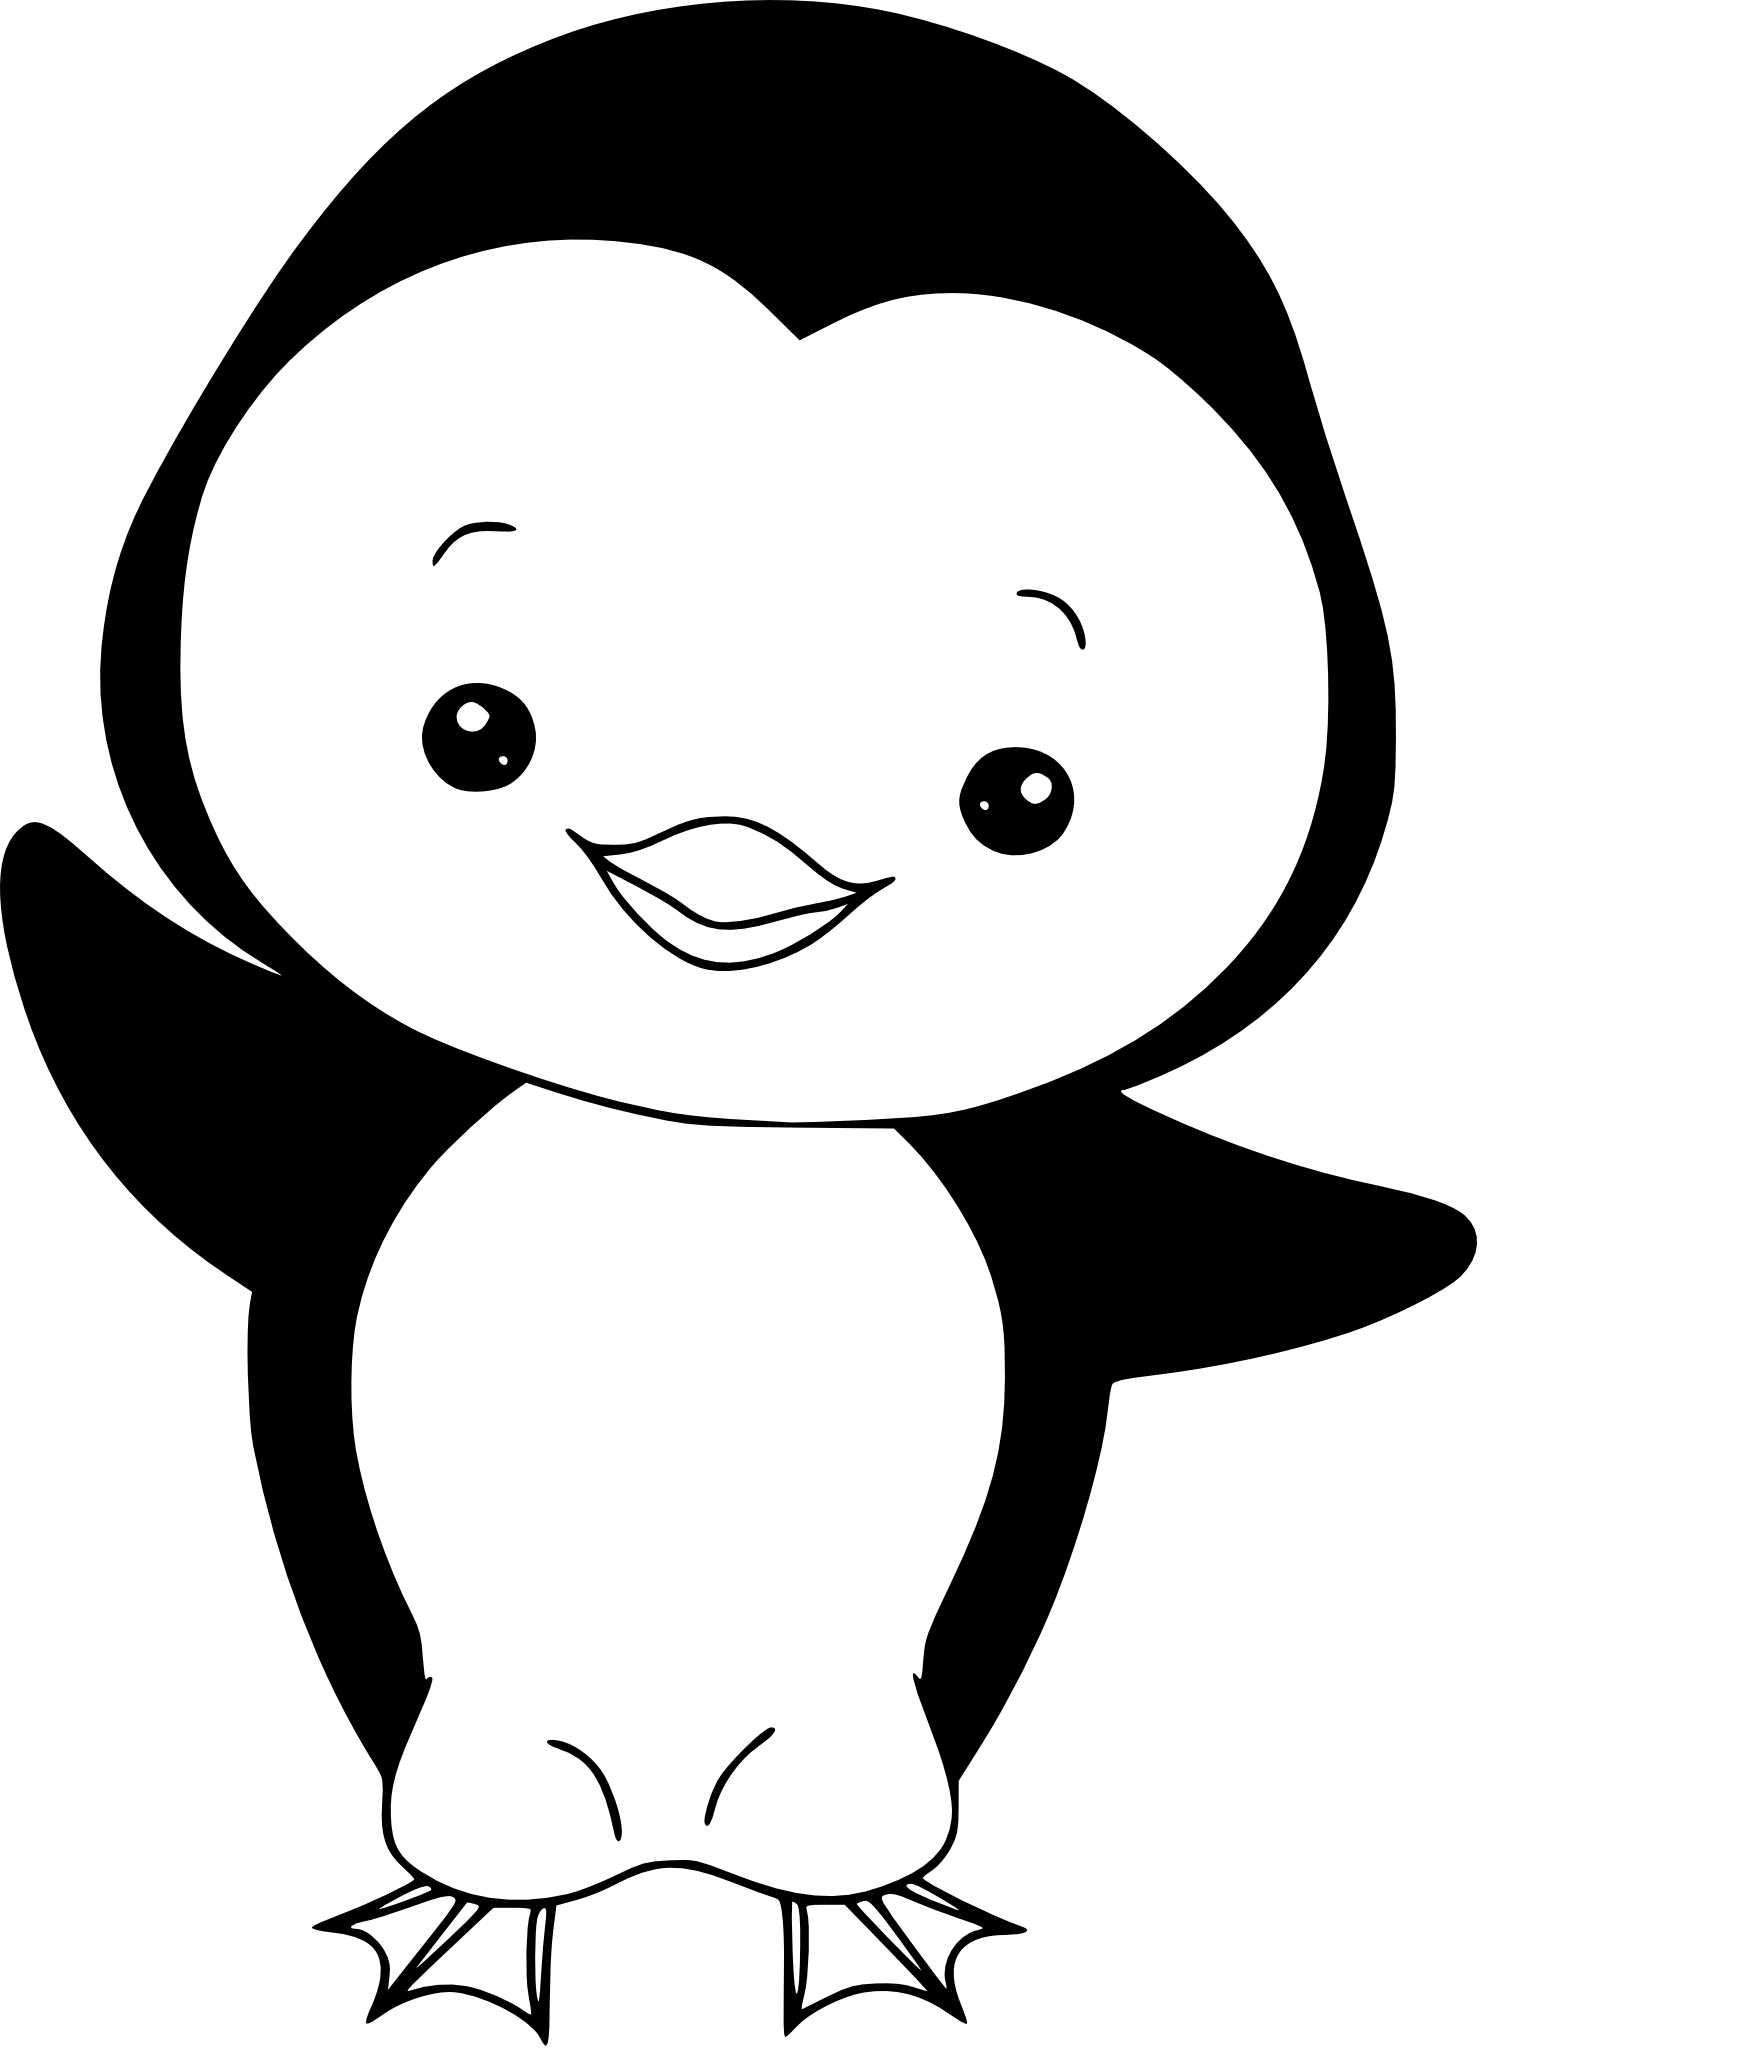 Easy Penguin coloring page